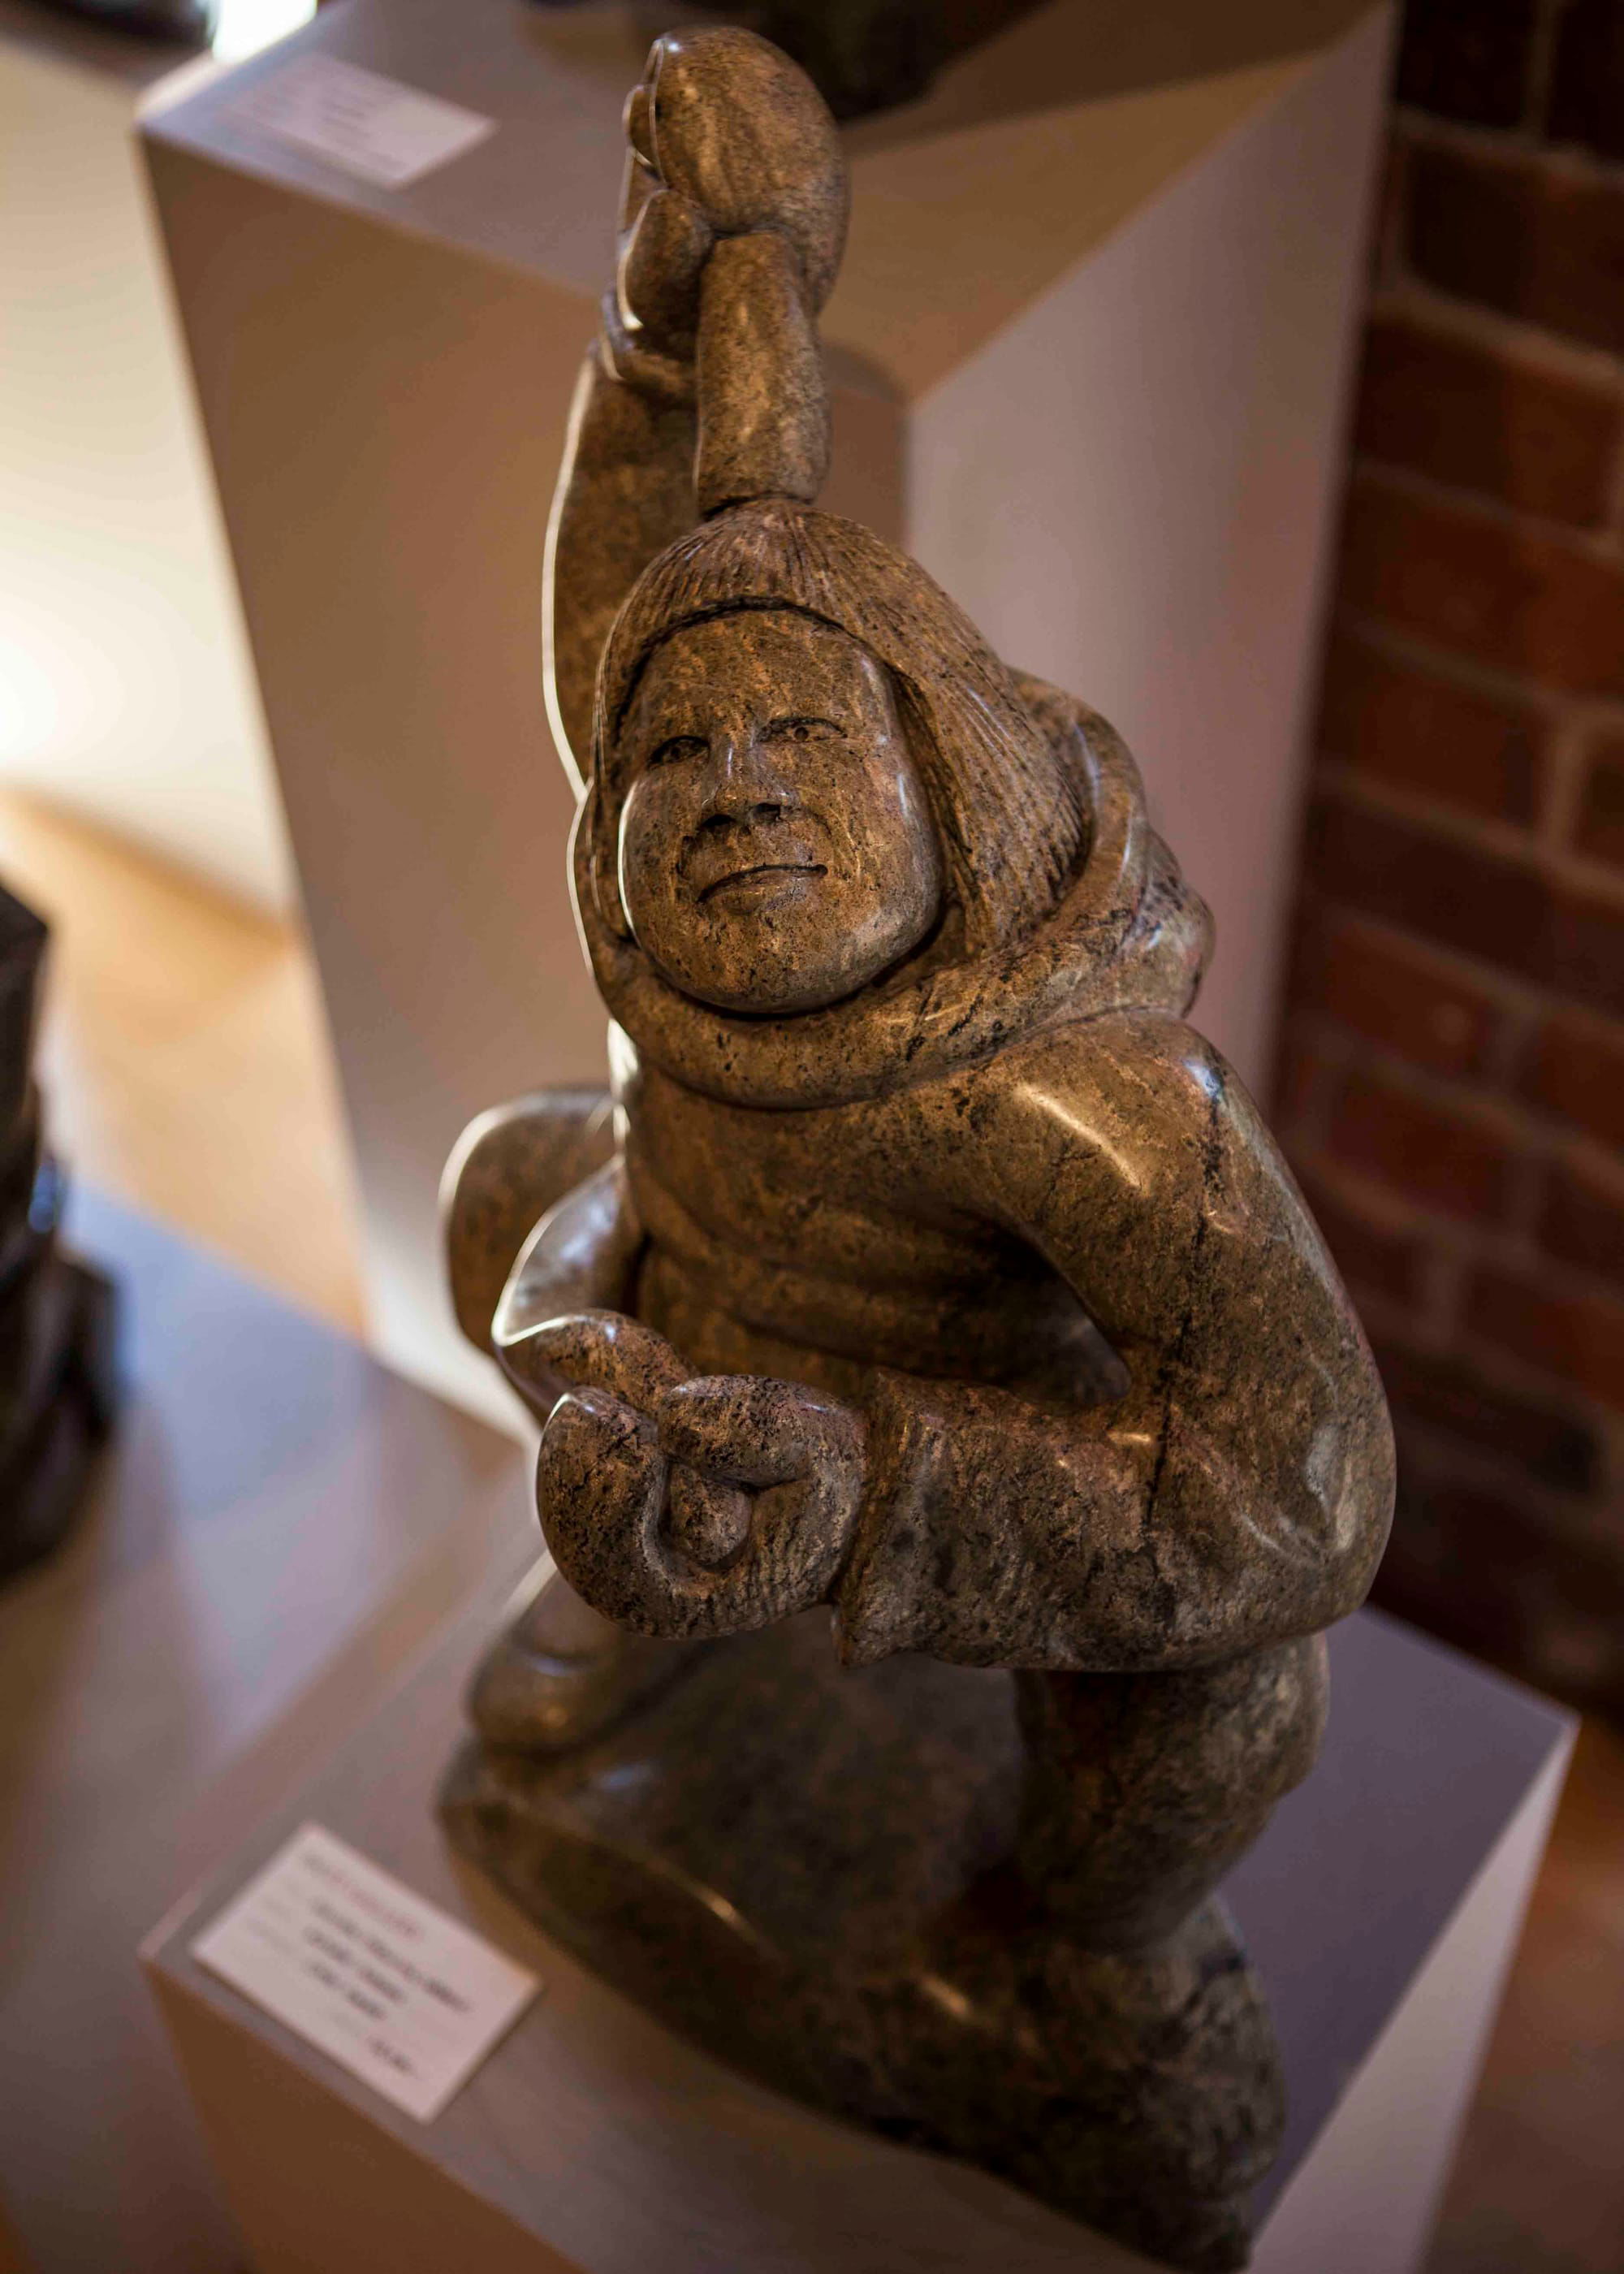 Inuit Sculpture for sale in local galleries.